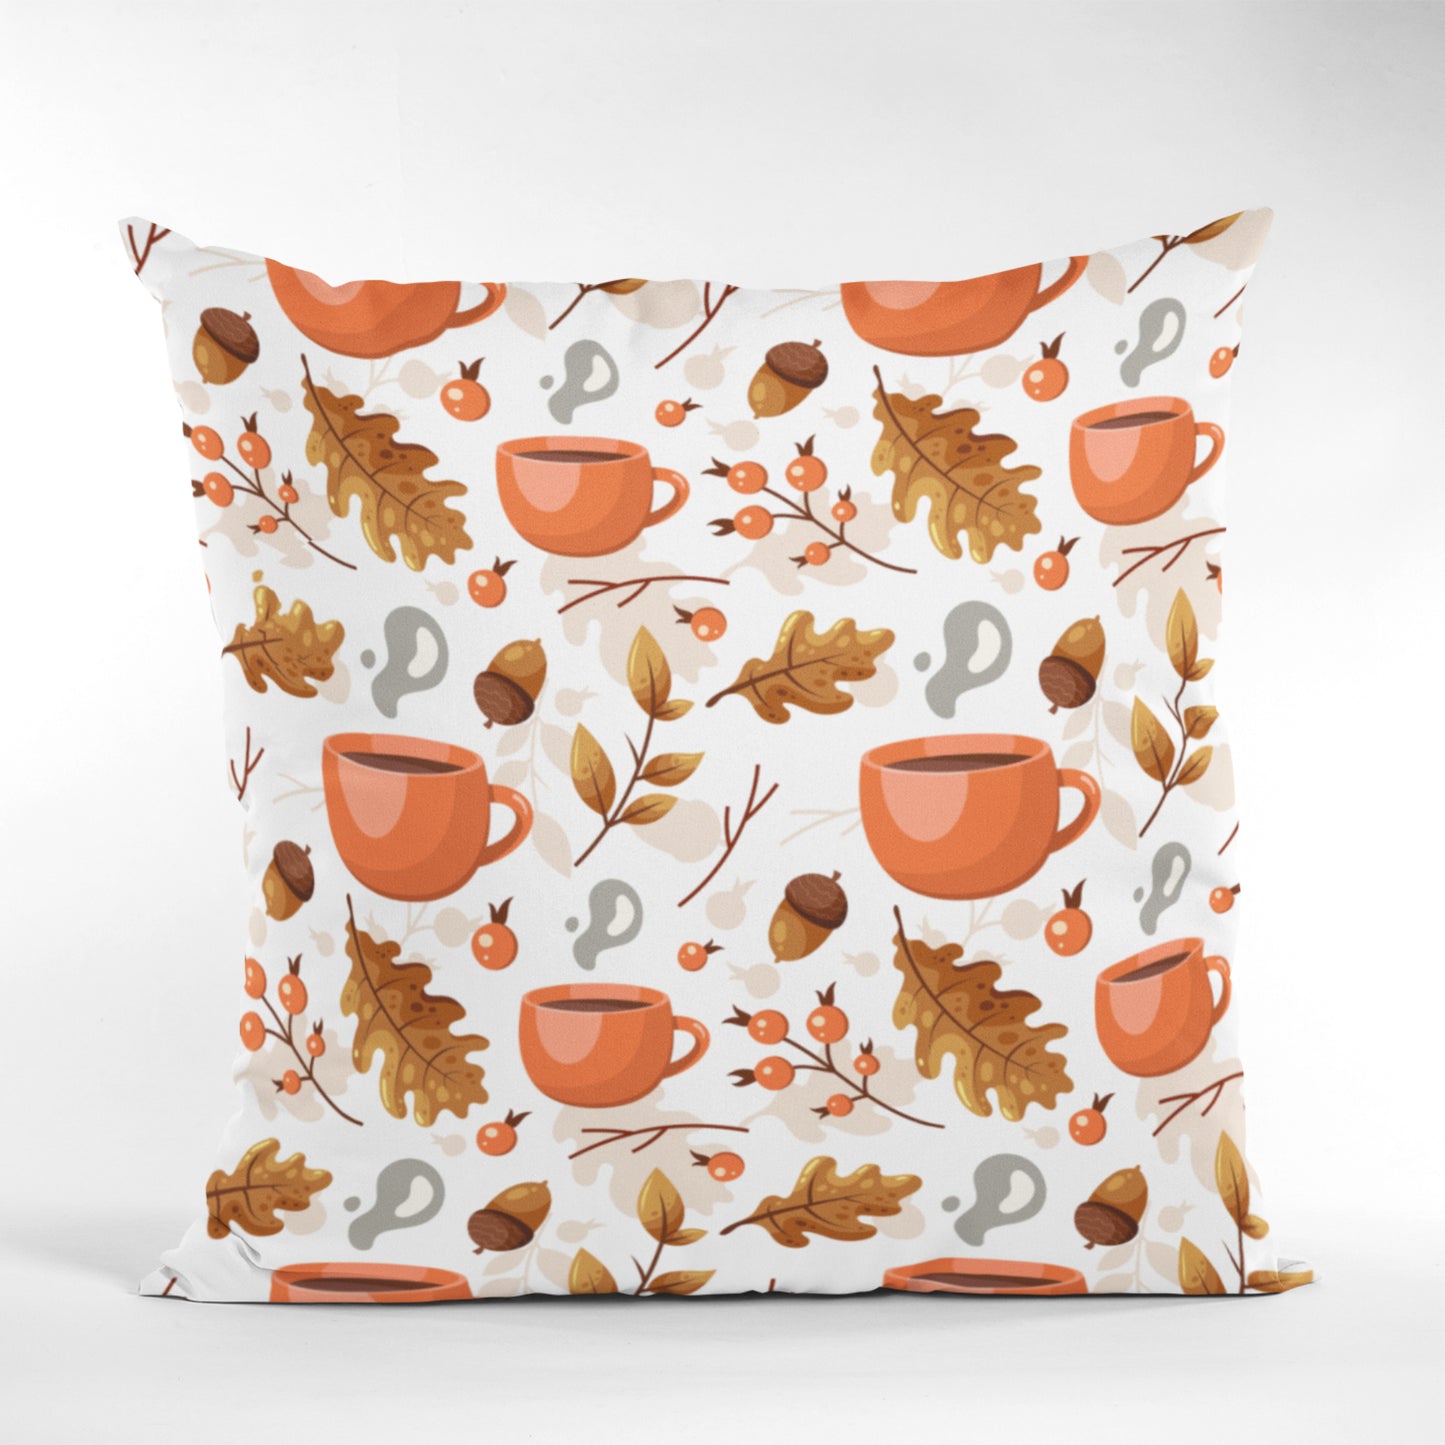 Cozy Fall Coffee Pattern Throw Pillow, Autumn Home Decor Pillow Case by Homeezone